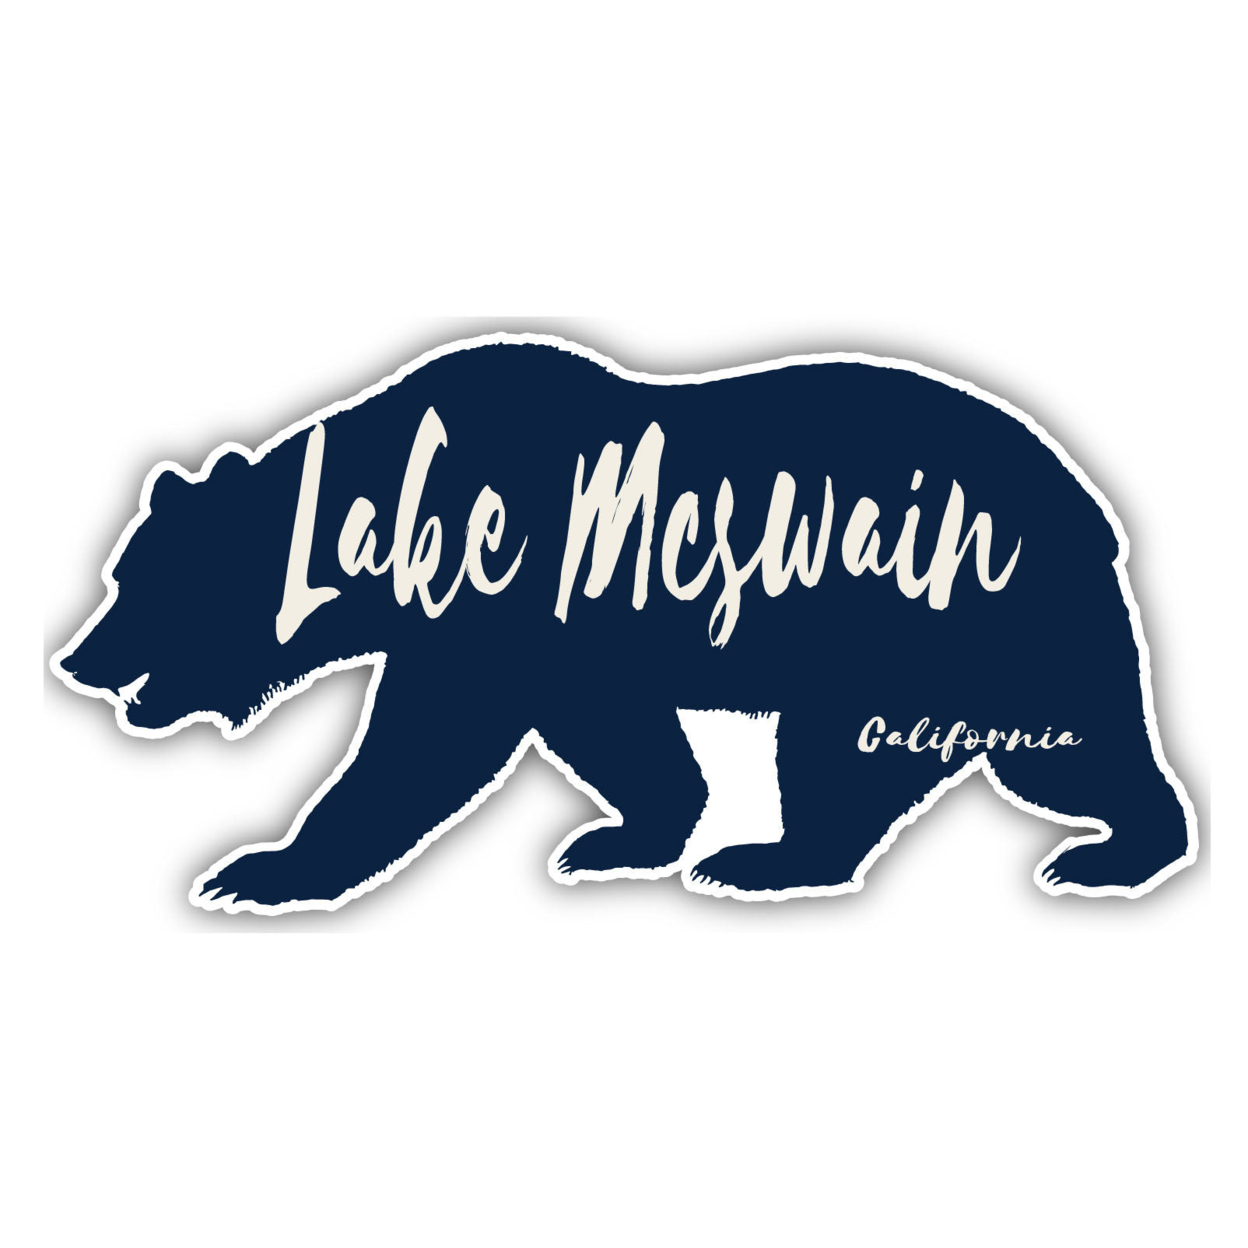 Lake Skinner California Souvenir Decorative Stickers (Choose Theme And Size) - 2-Inch, Tent